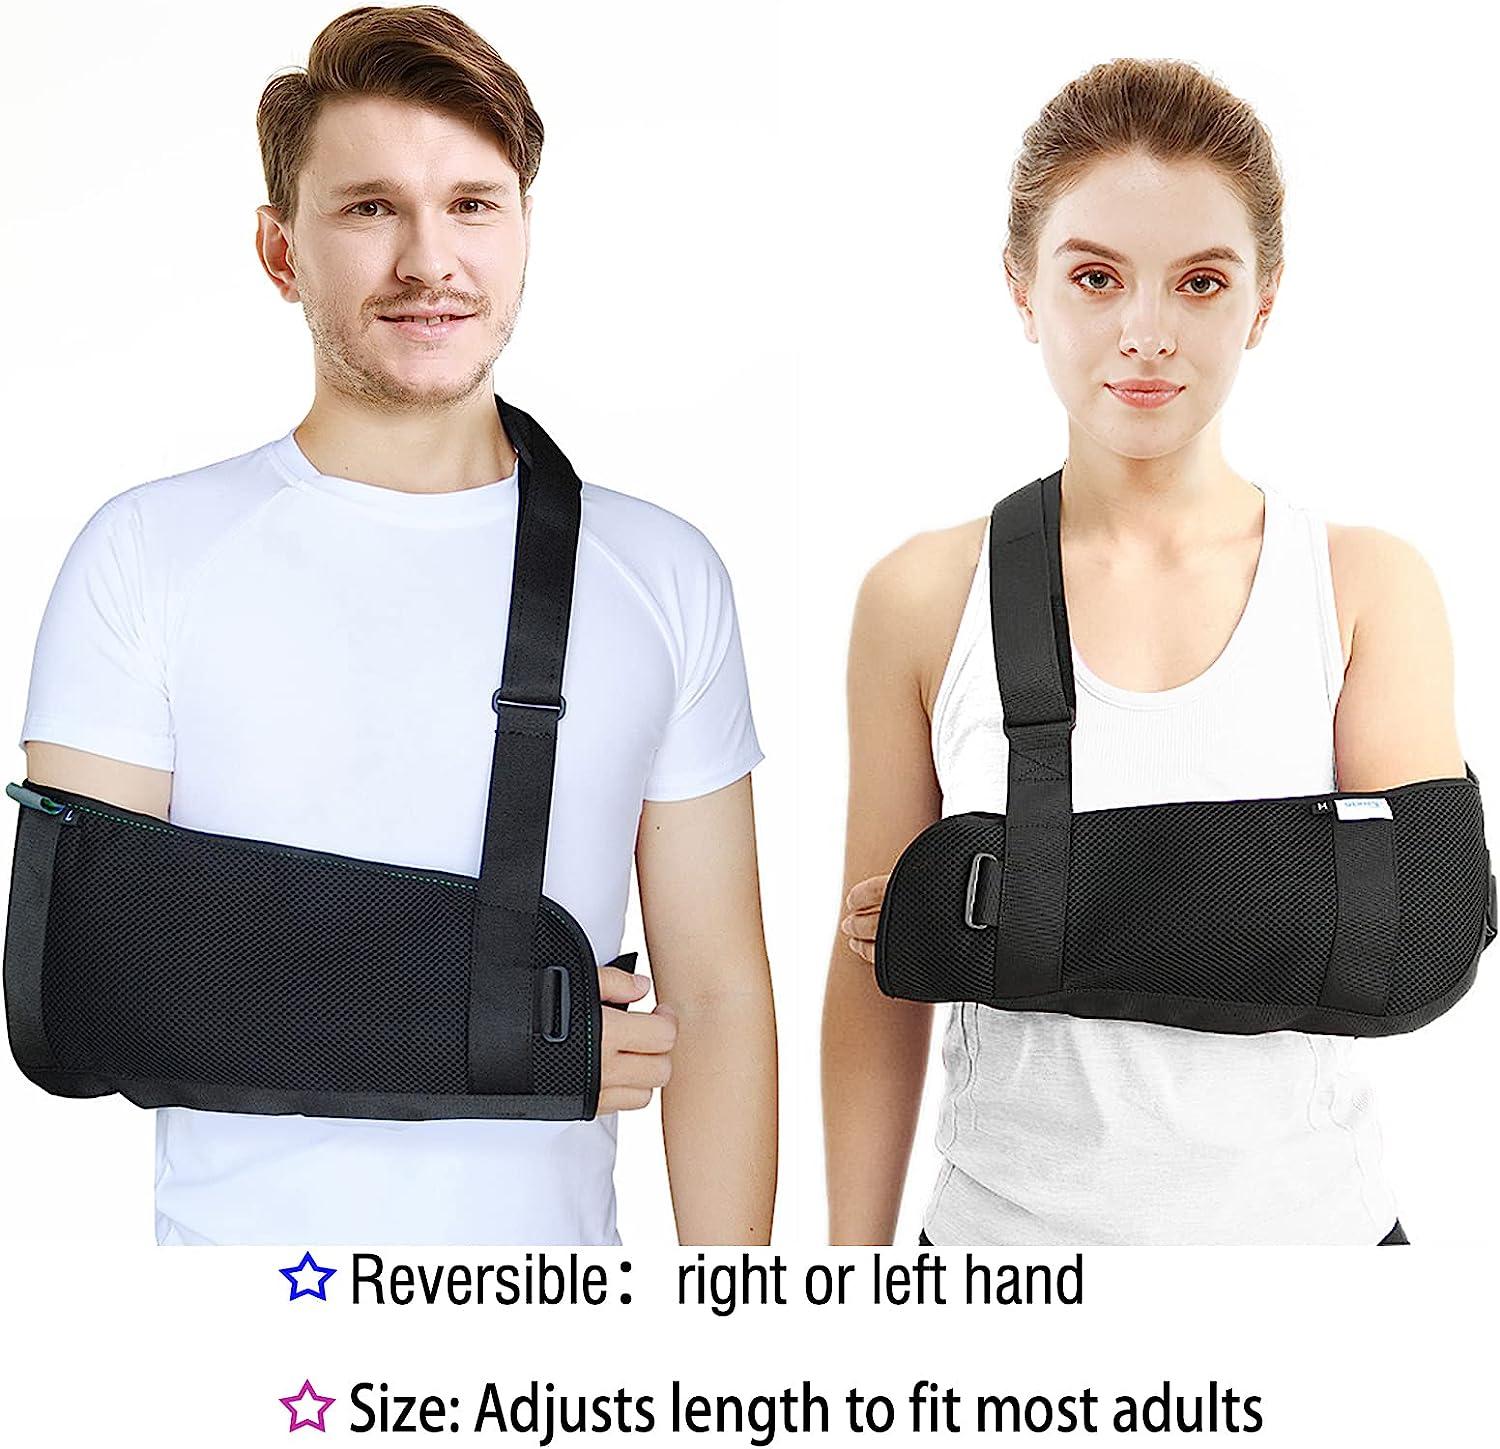 What's The Best Shoulder & Arm Sling, Immobilizer, or Stabilizer